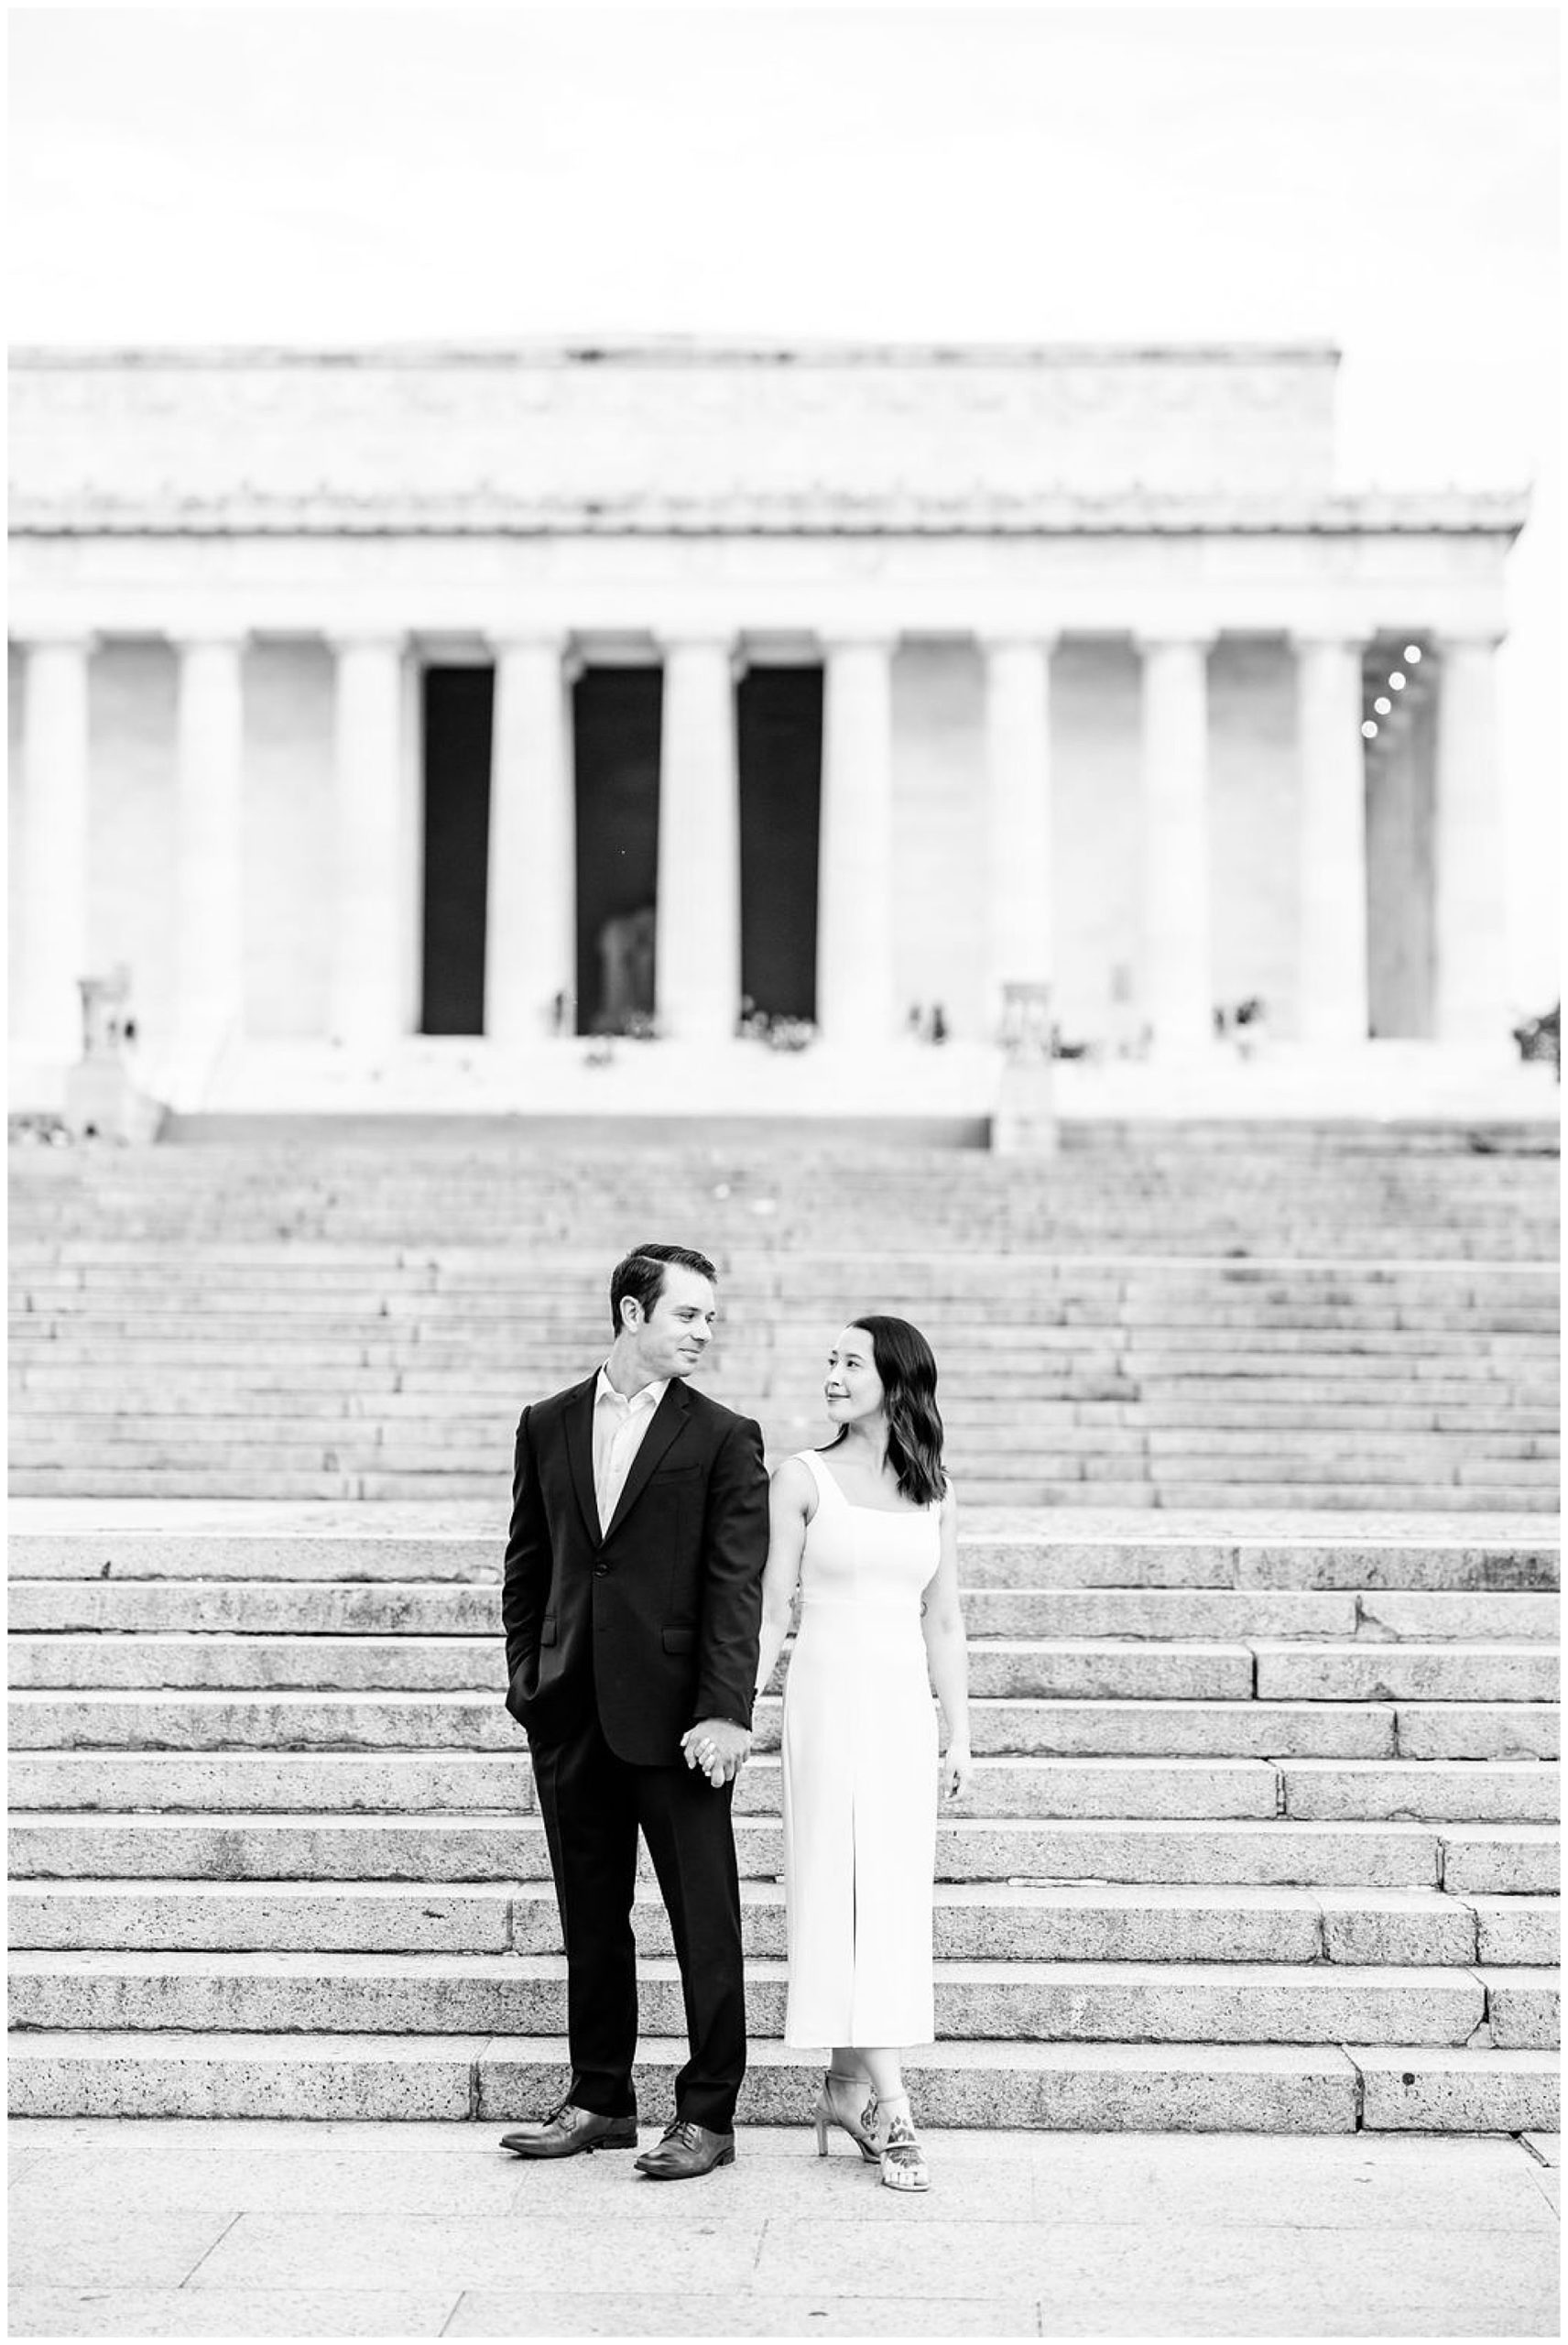 pink sunrise Lincoln Memorial engagement, DC engagement session, DC engagement photographer, formal DC engagement photos, DC elopement photographer, DC wedding photographer, classic DC engagement photos, luxury DC engagement photographer, Rachel E.H. Photography, black and white, couple in front of stairs, stairs leading to lincoln memorial